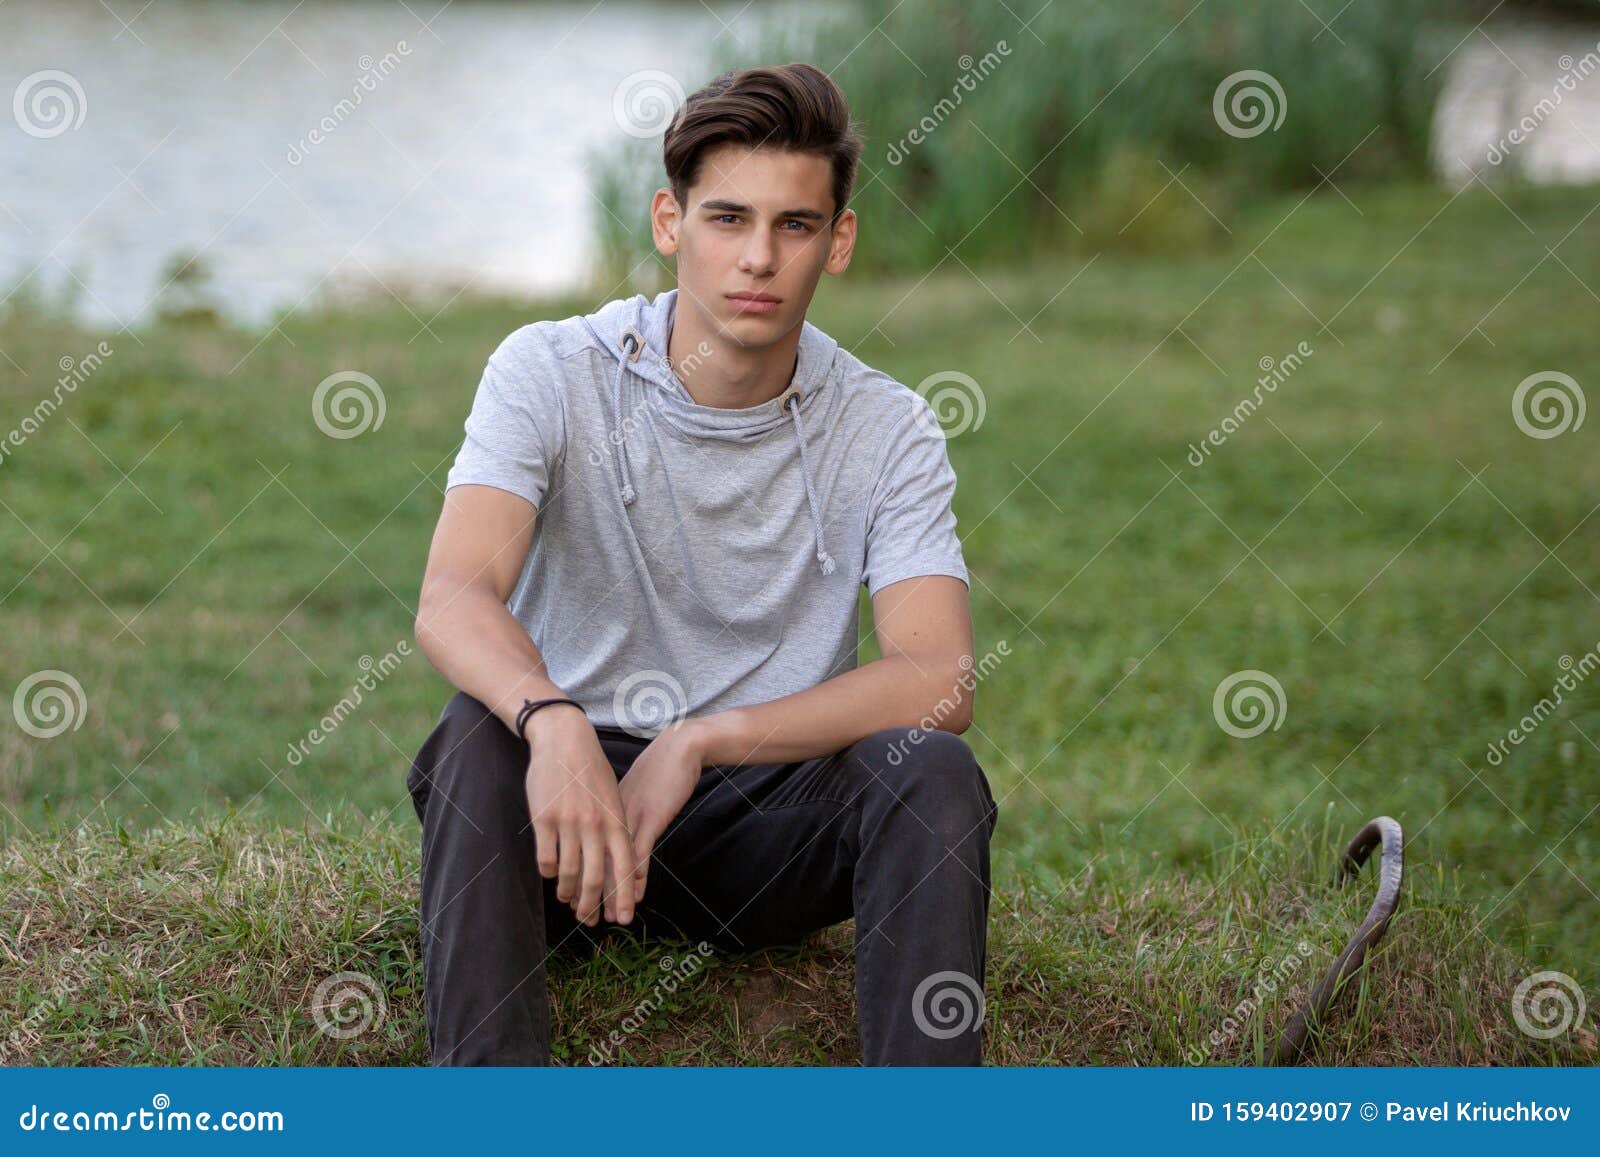 Portrait of a Young Handsome Man Outdoors. Teenager Stock Image - Image ...